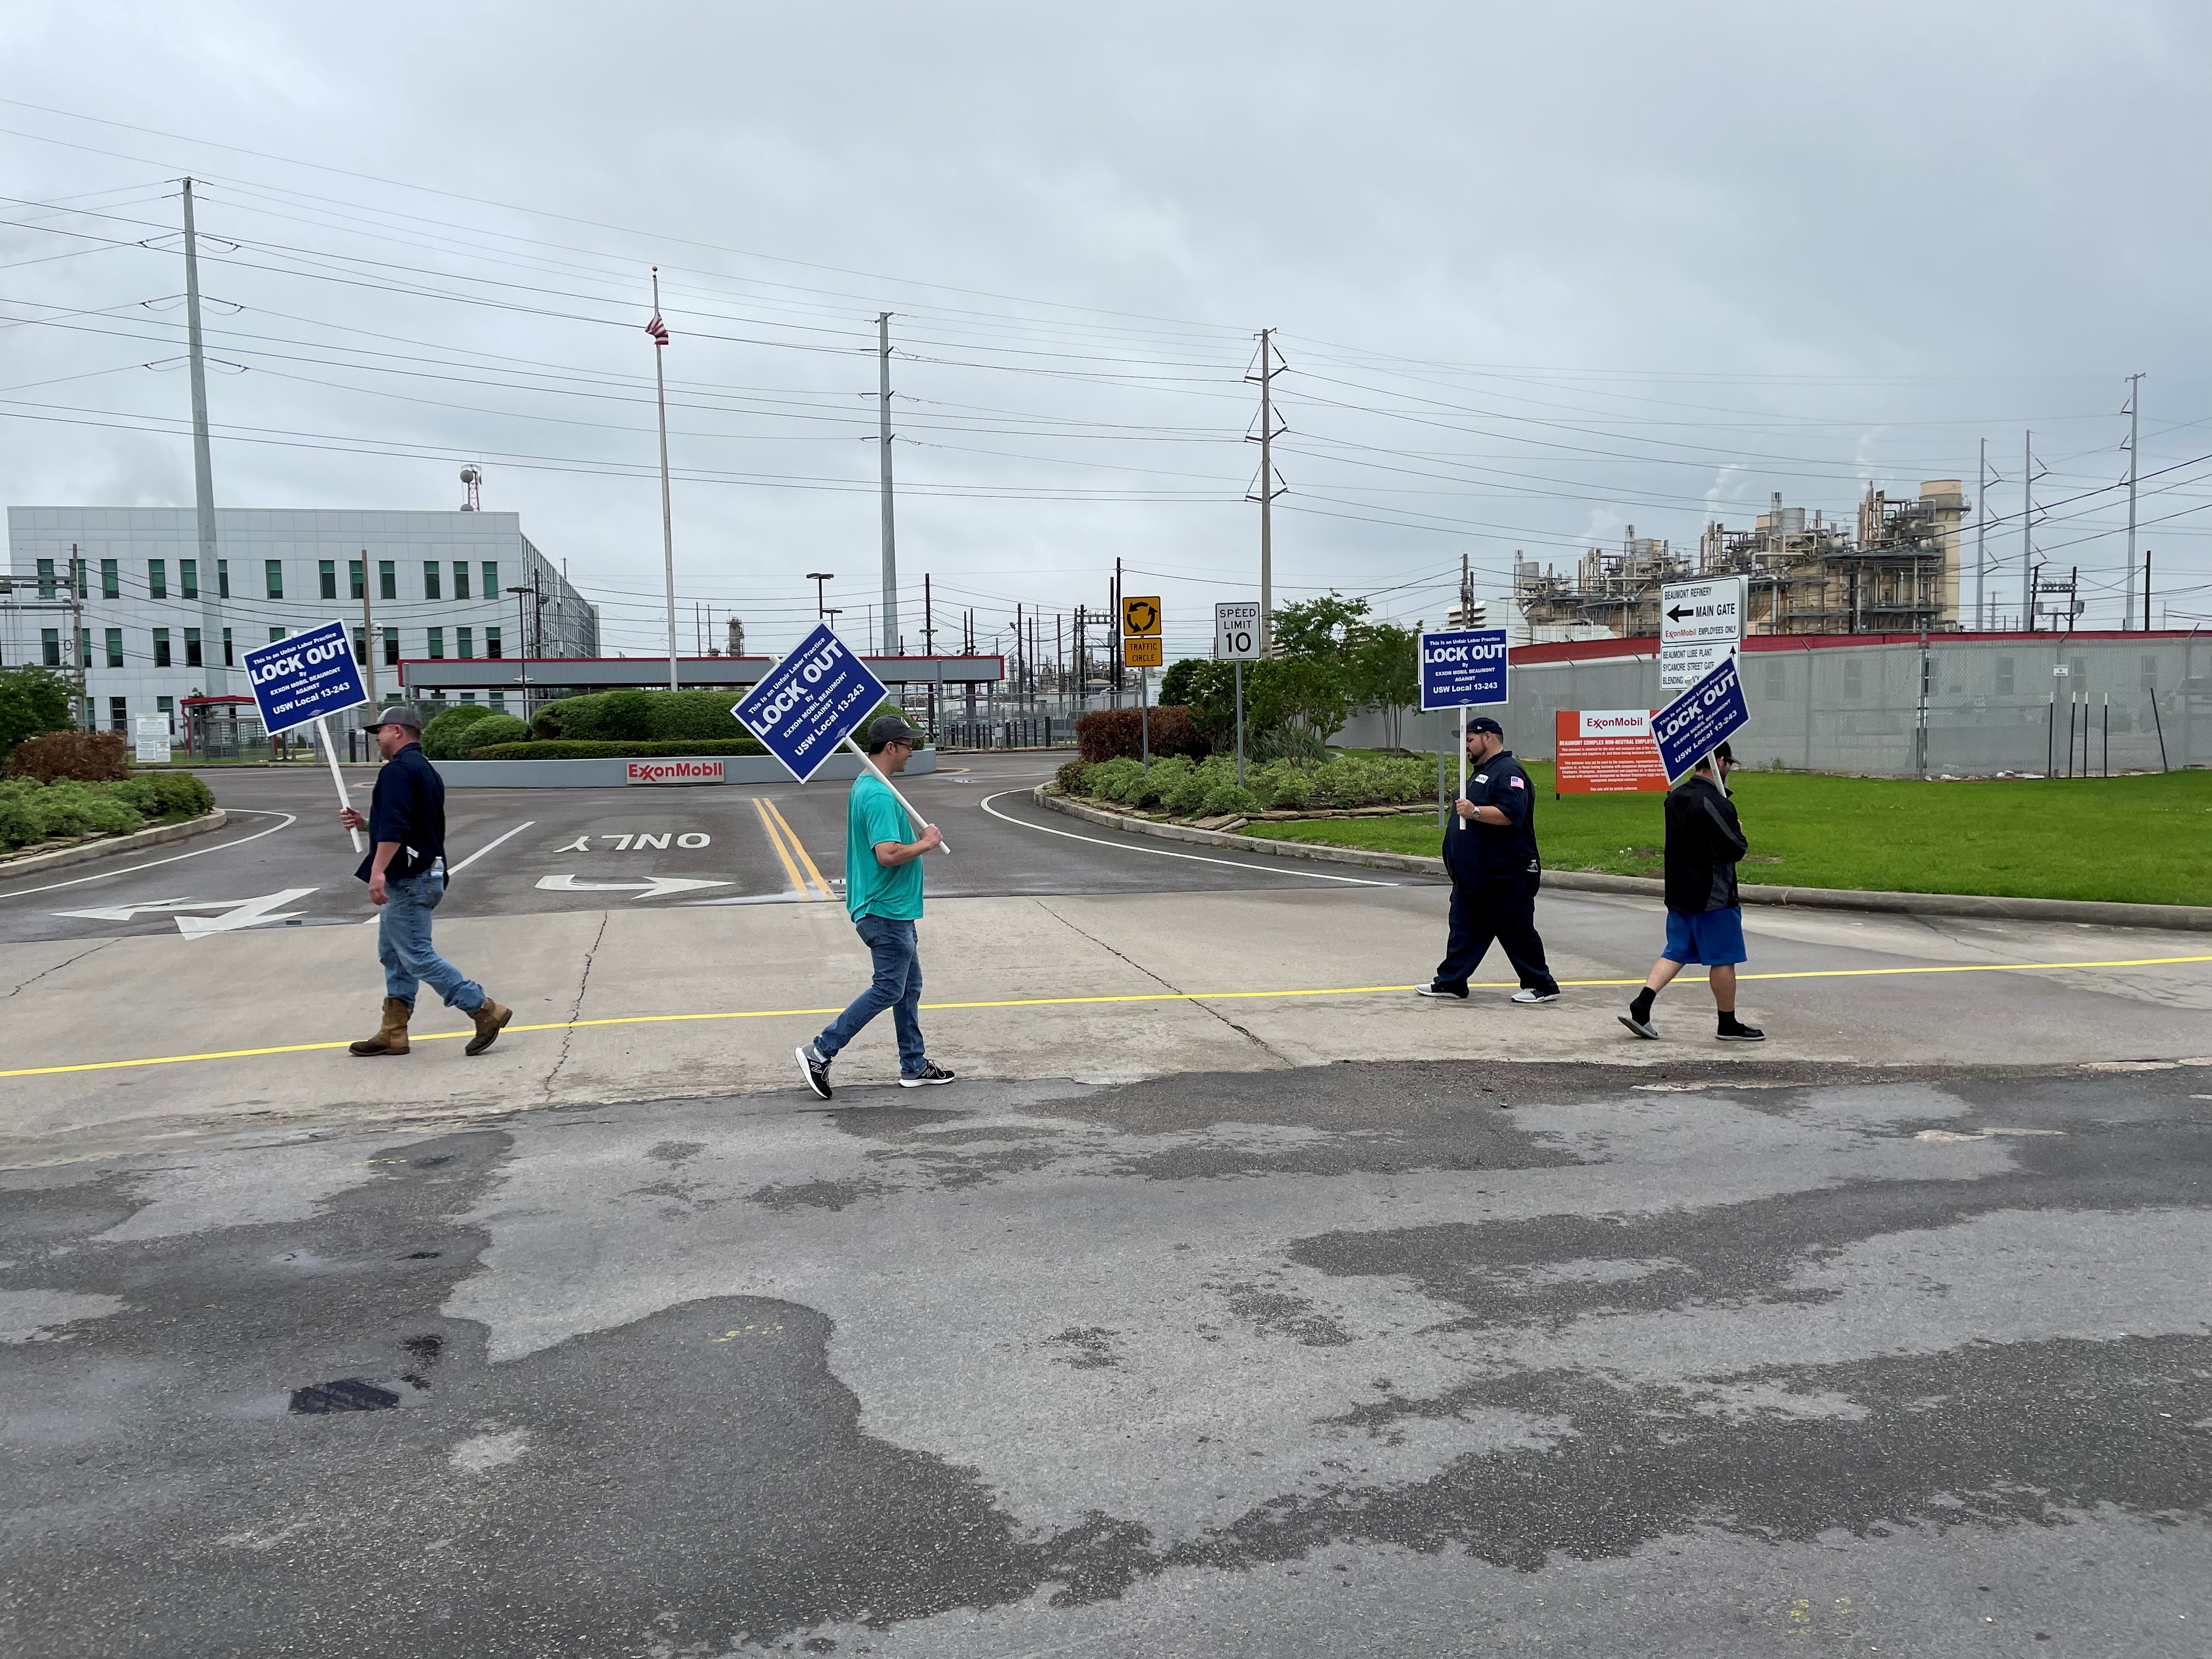 United Steelworkers union members picket outside the Exxon Mobil Beaumont, after being locked out of the plant by the company, in Beaumont, Texas, U.S., May 1, 2021.  REUTERS/Erwin Seba/File Photo